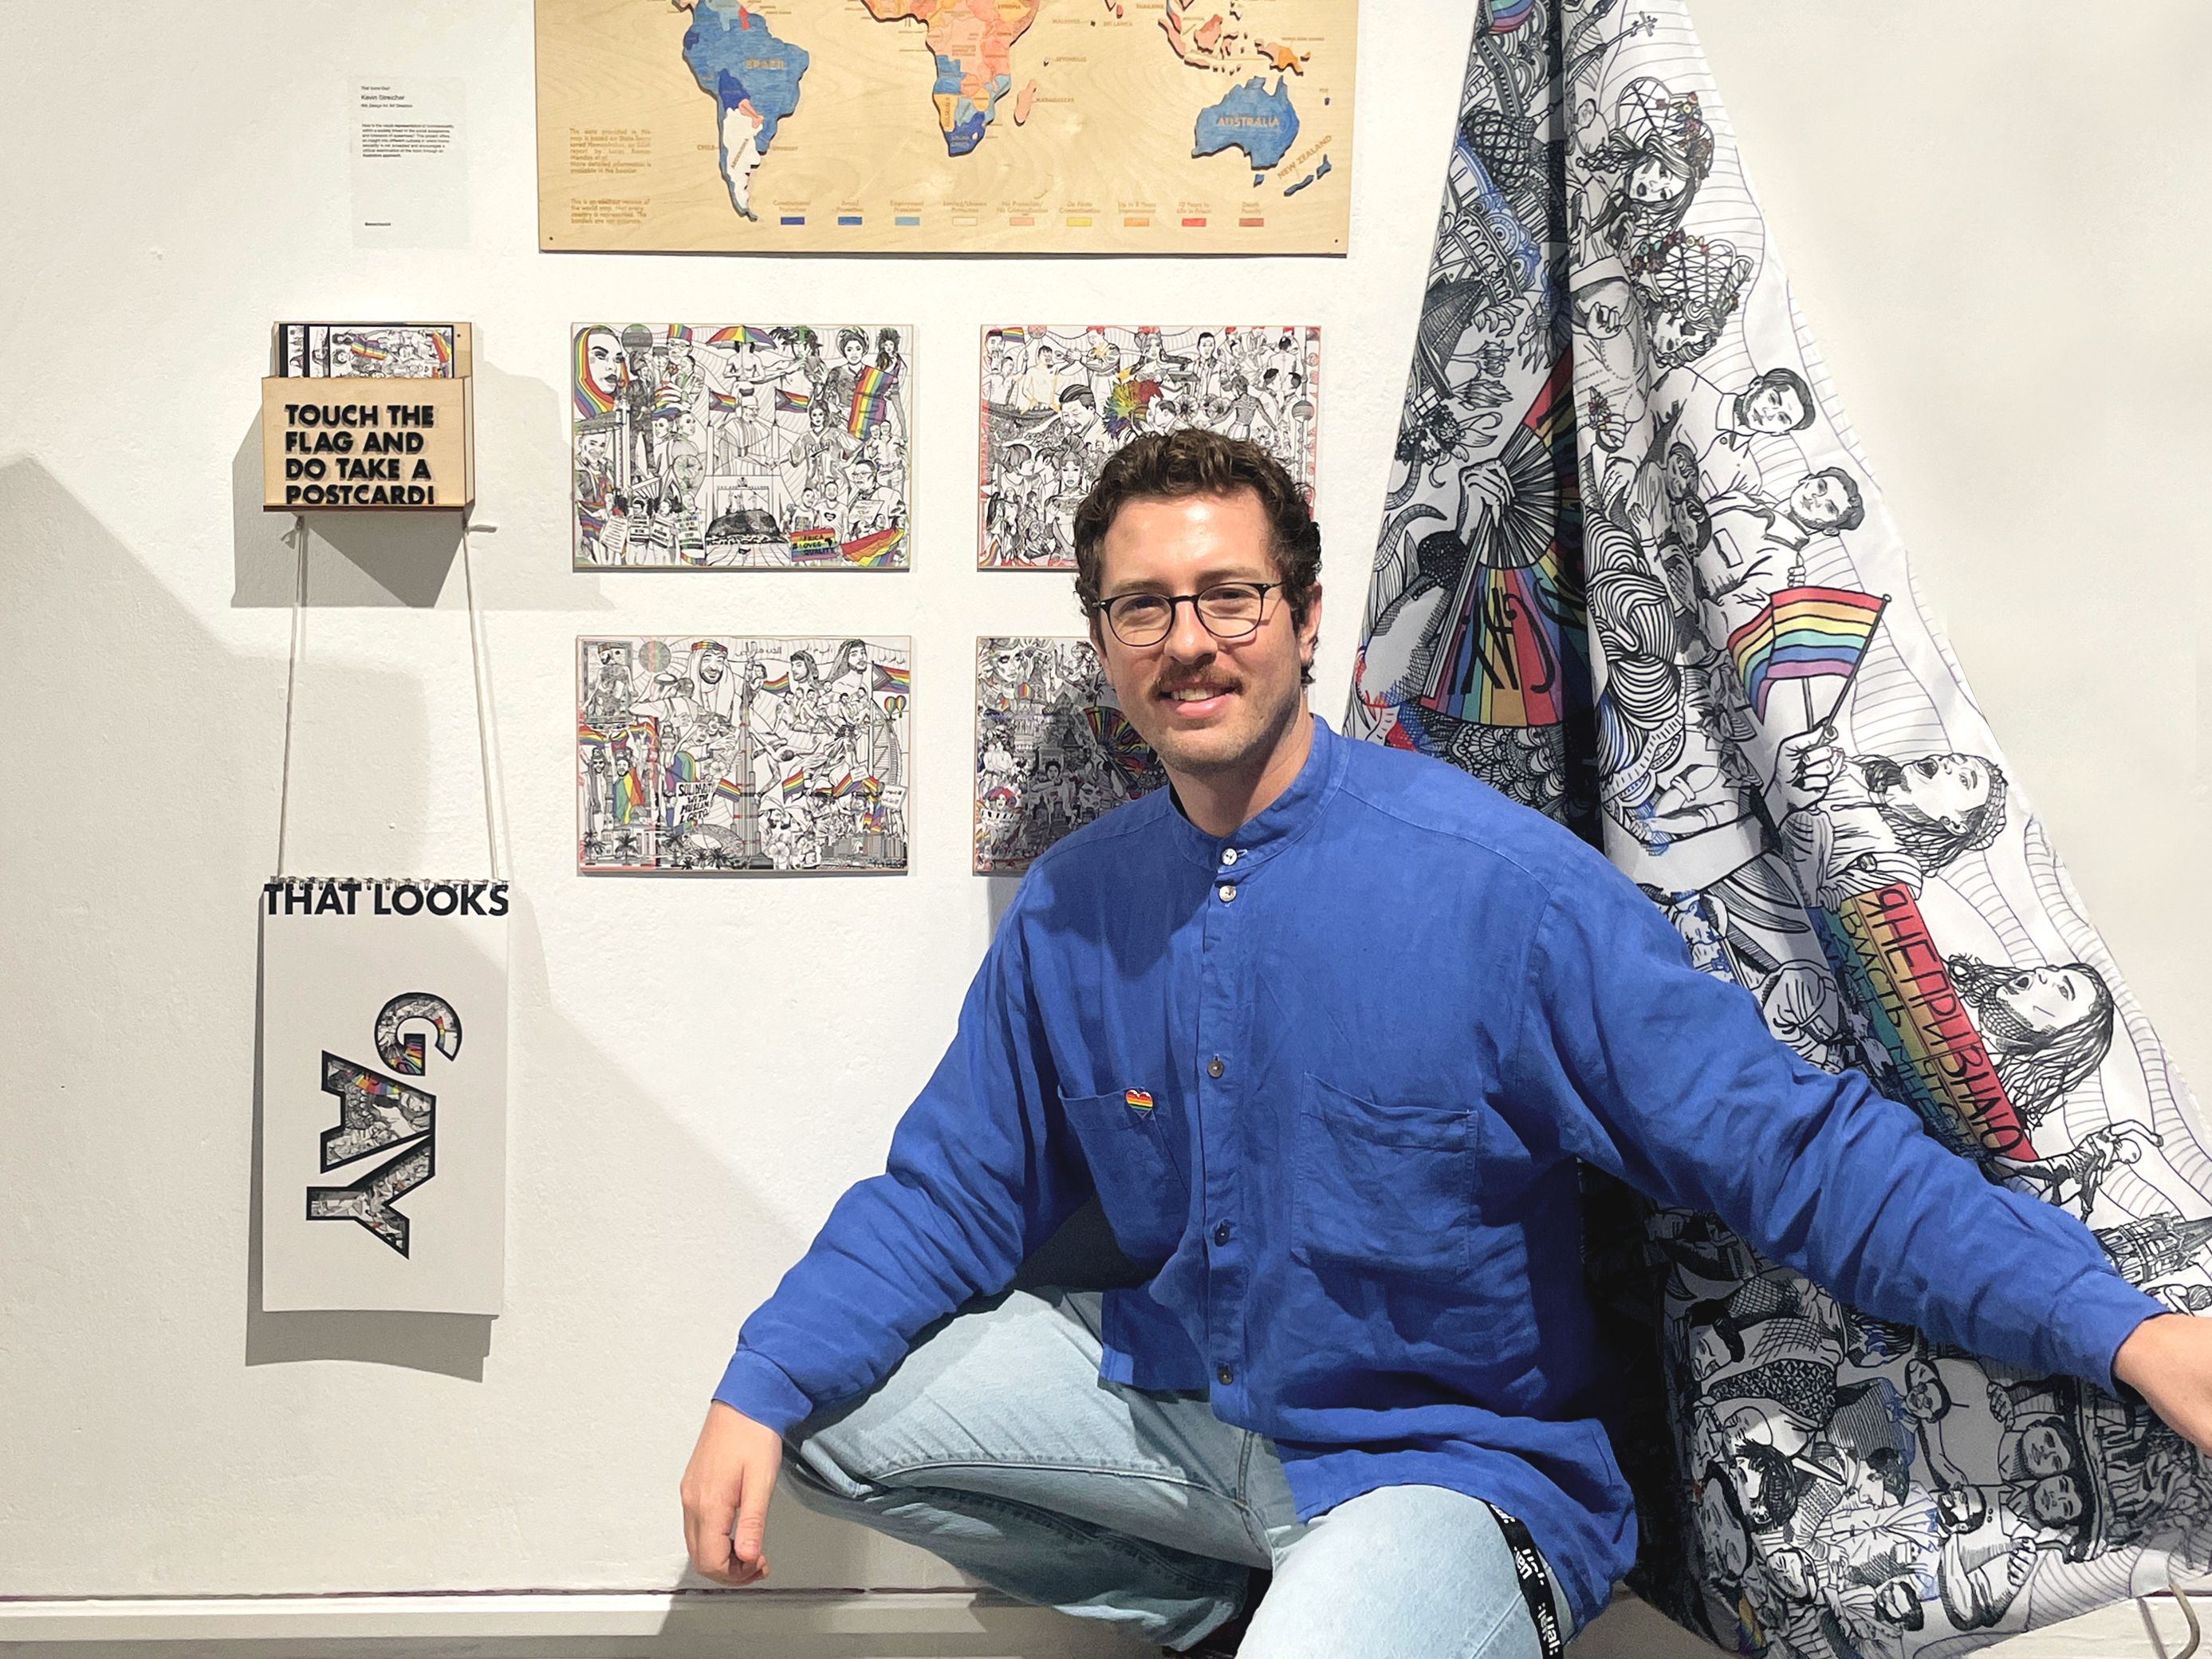 Student crouching down in front of their final project. The project consists of two large black and white illustrations and a flag